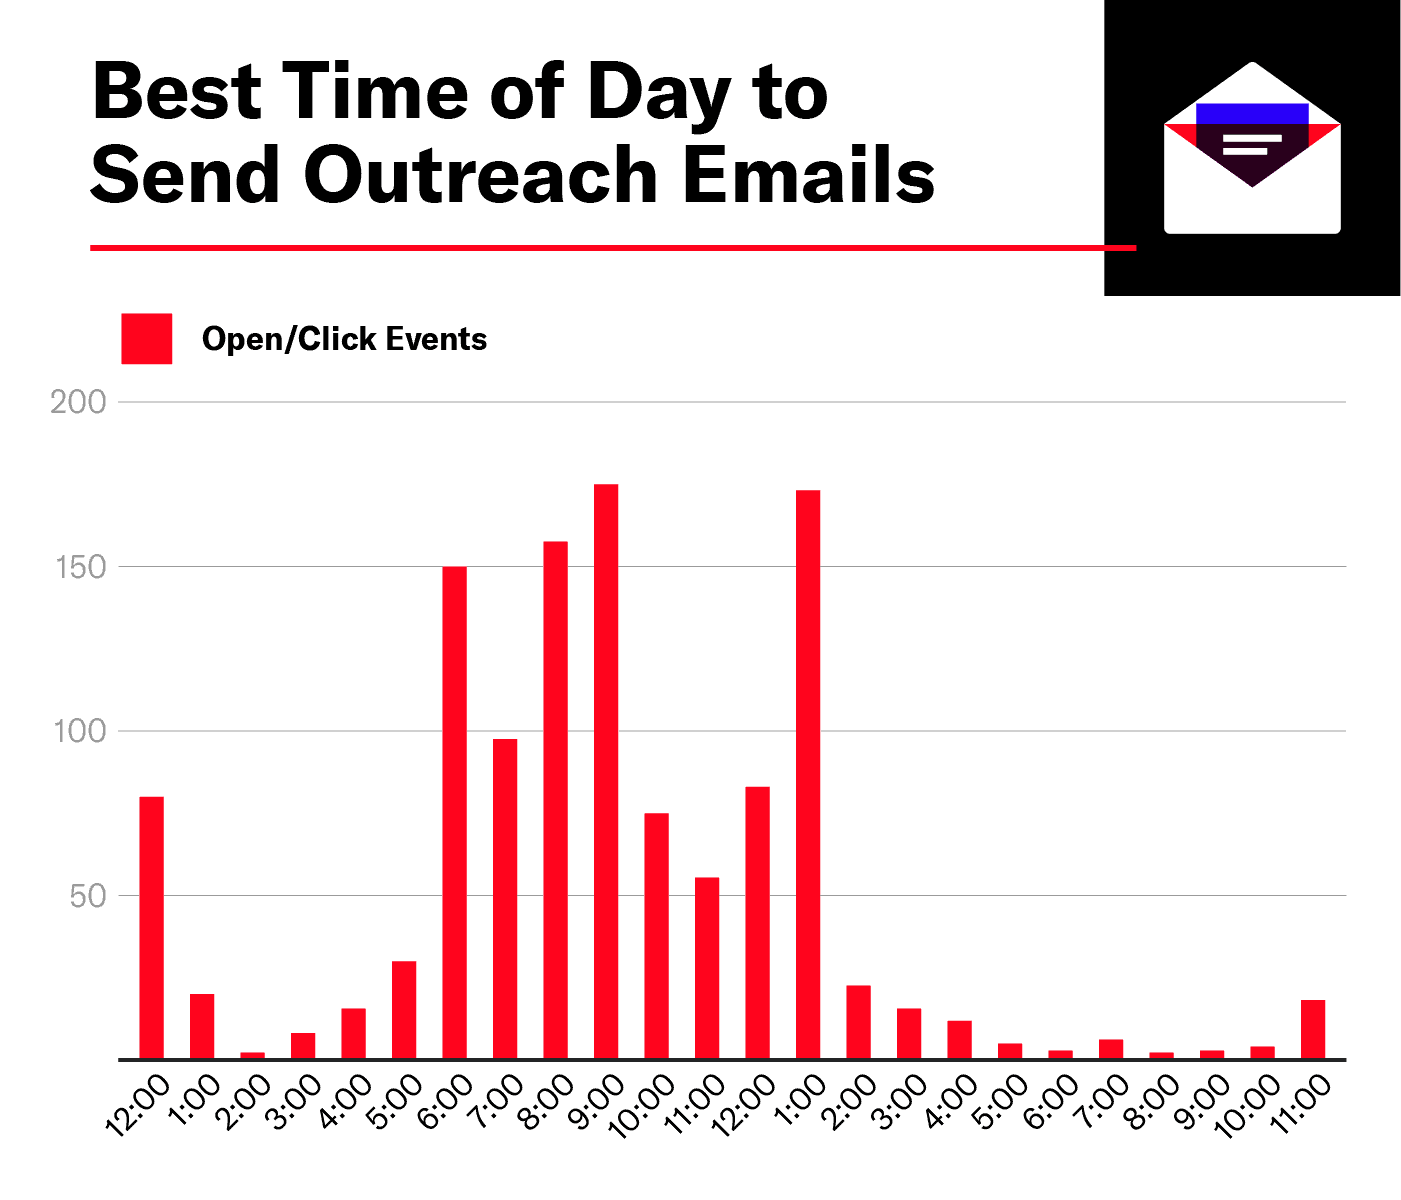 Bar graph shows the best time of day to send outreach emails.